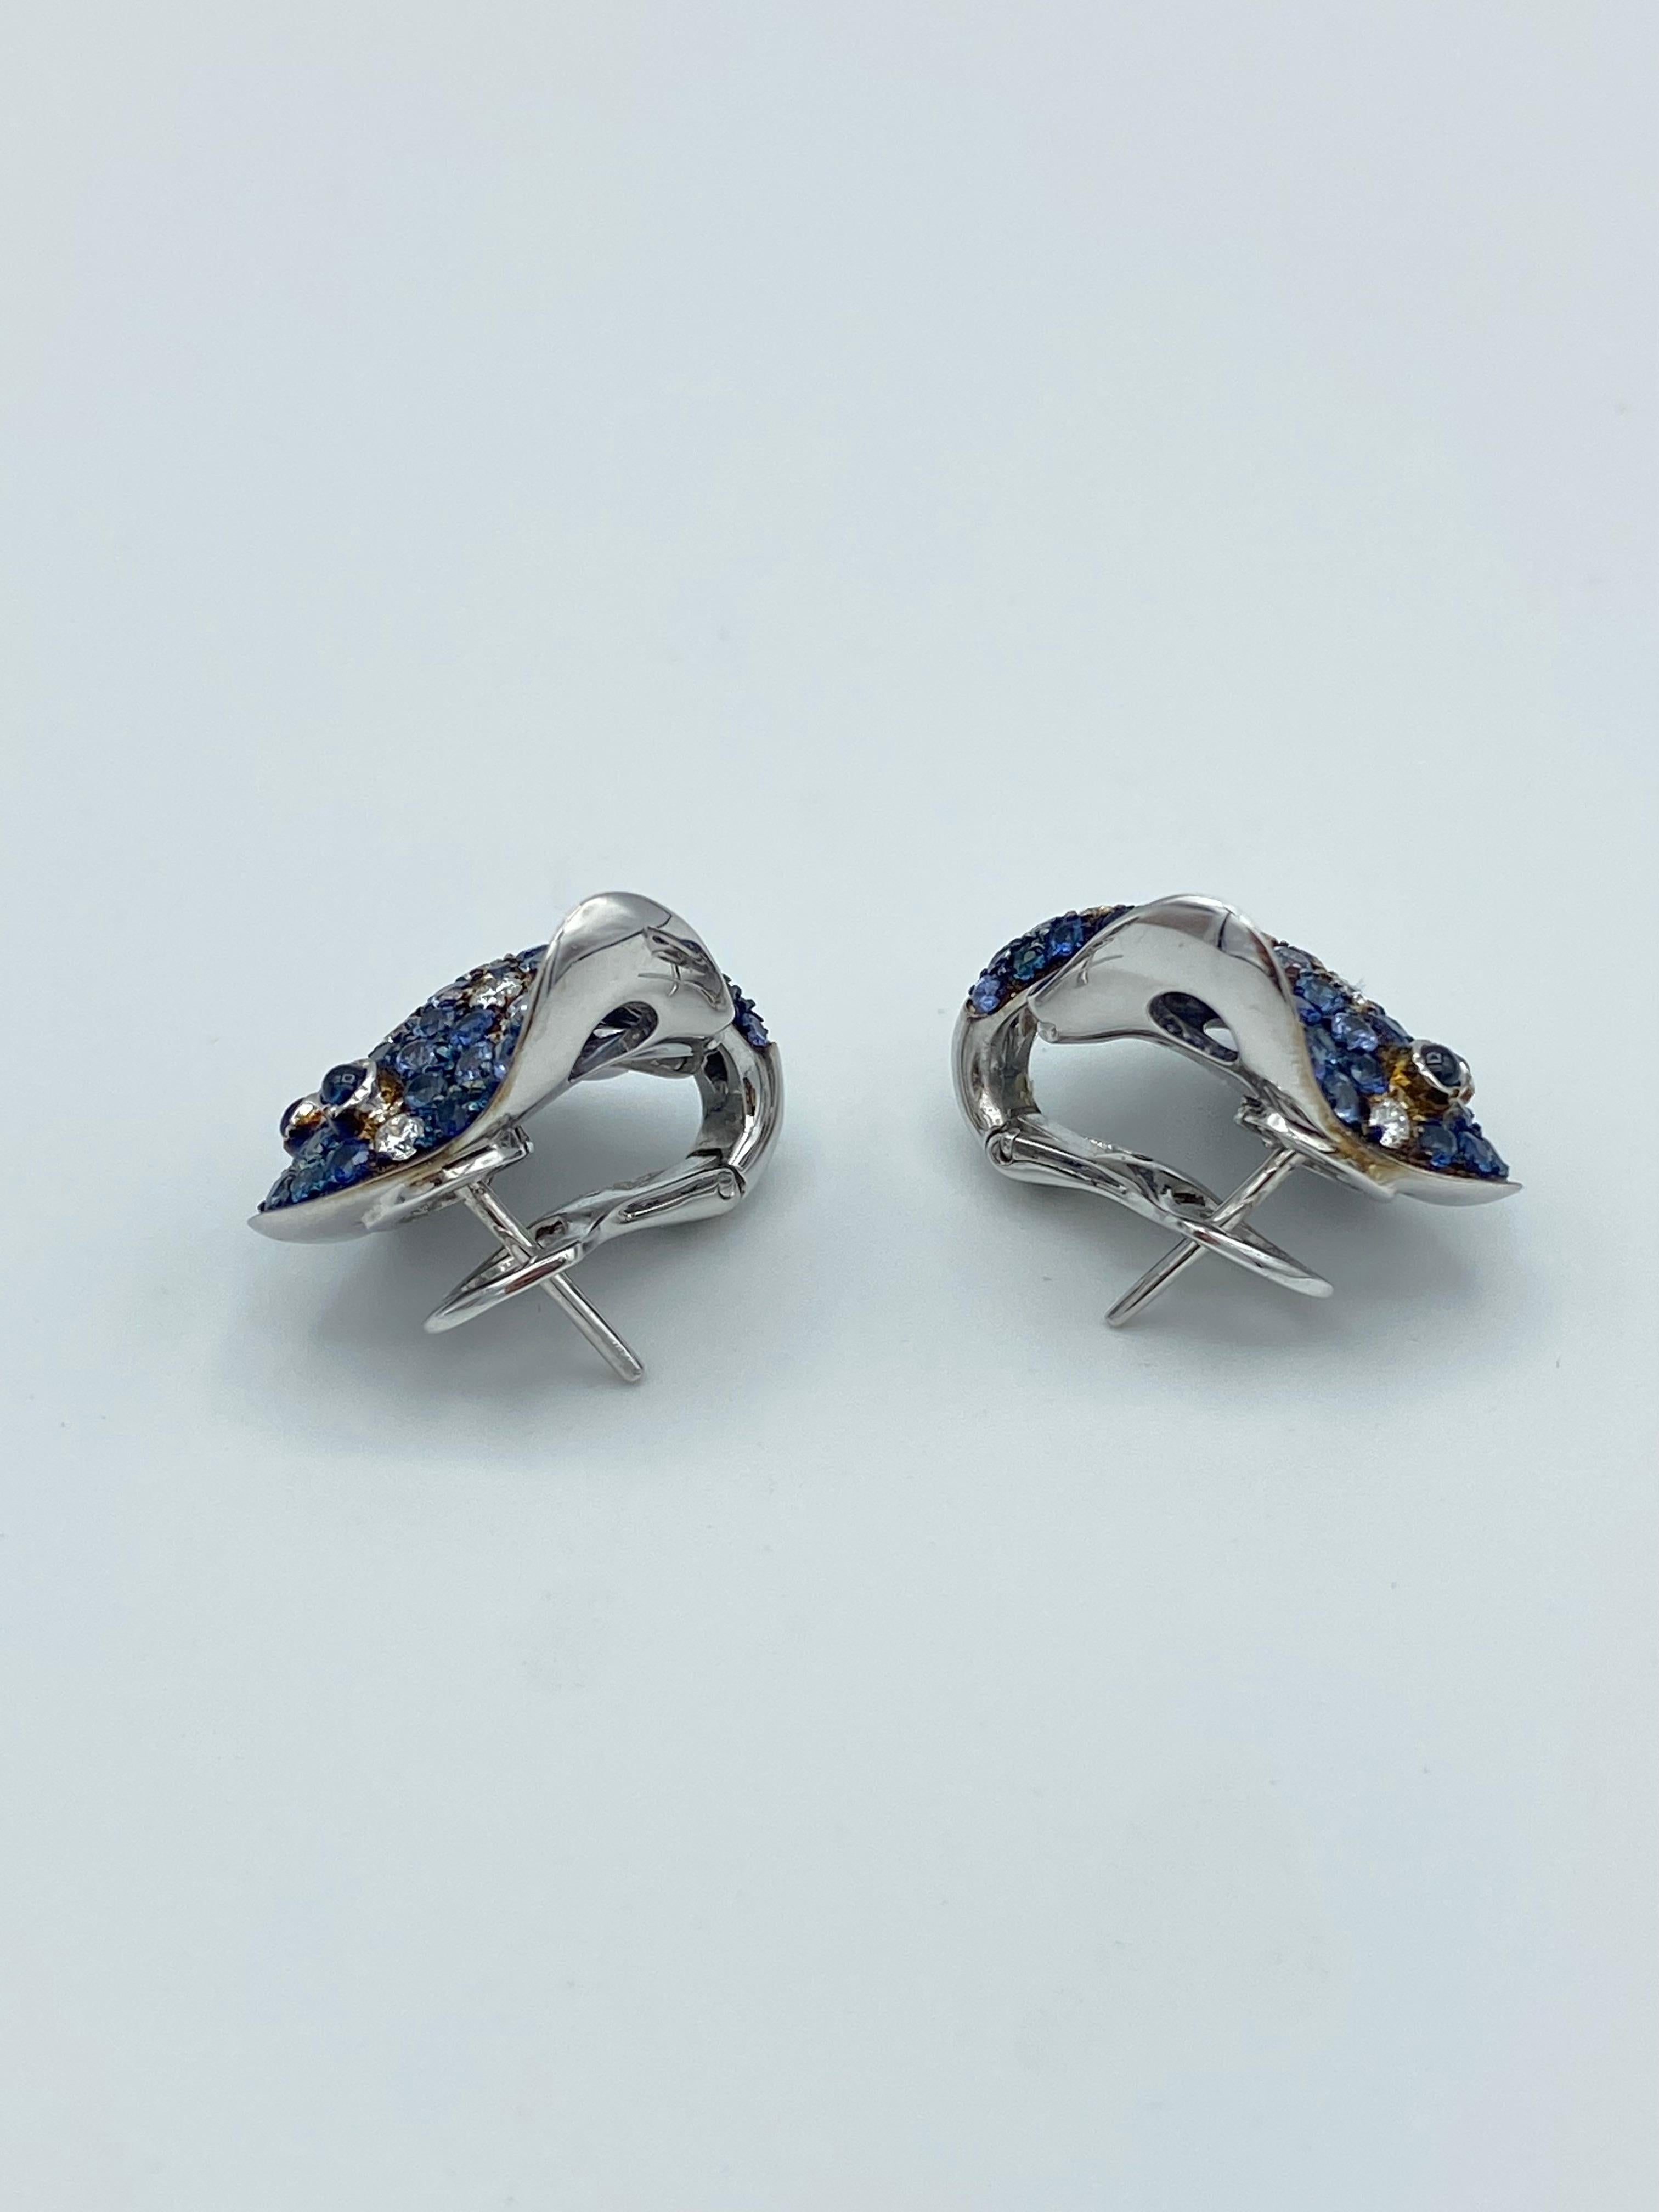 Round Cut Petronilla Ray Fish White Diamond Blue Sapphire 18Kt Gold Made in Italy Earrings For Sale